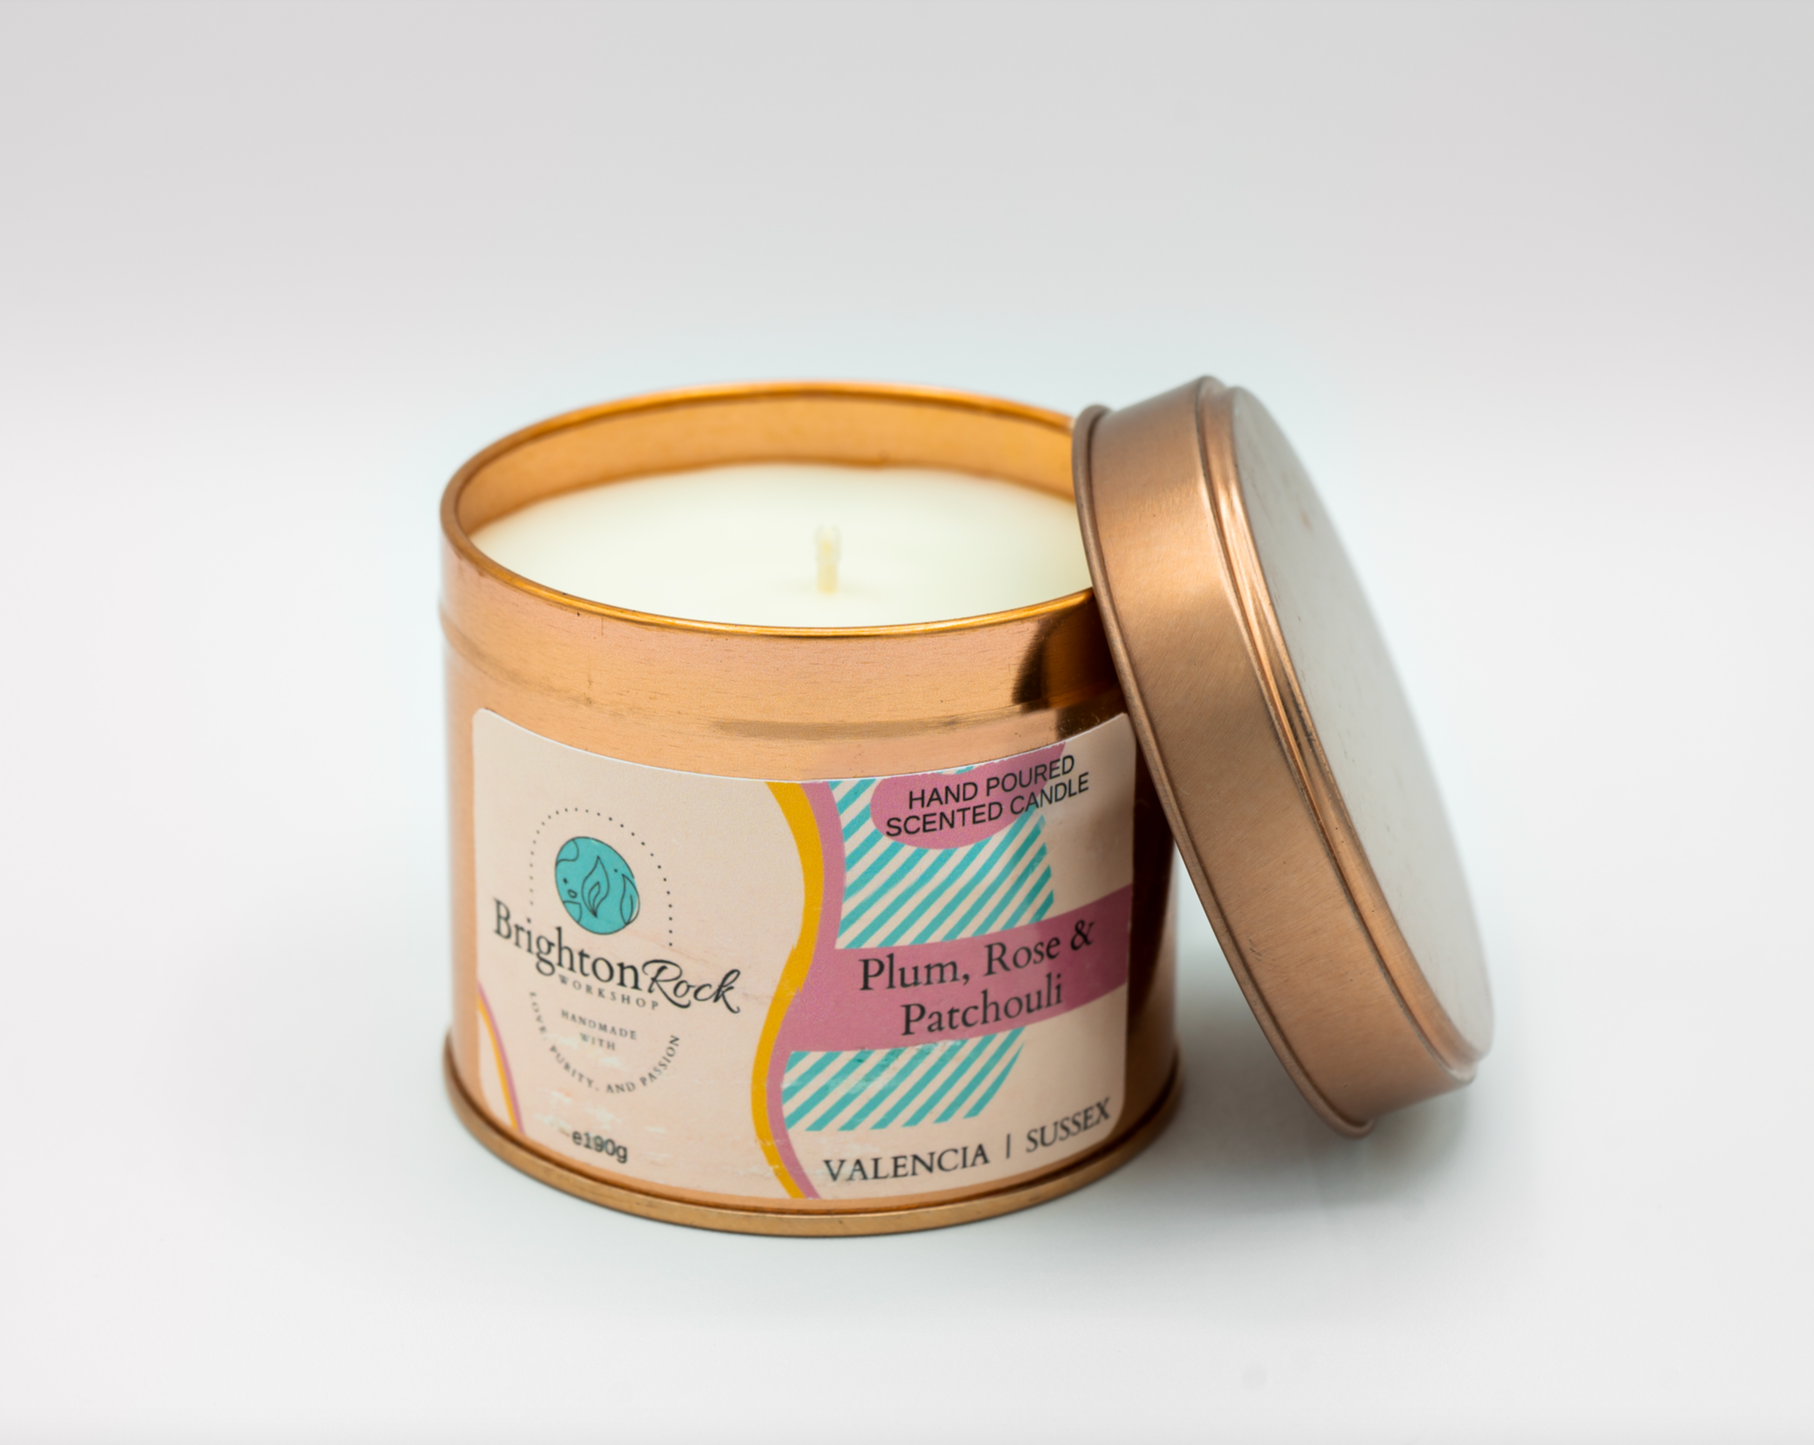 plum, rose & patchouli scented candle in a rose gold tin with matching lid. Brighton Rock Workshop strongly-scented candles. 190g eco-friendly, sustainable, recyclable packaging, vegan friendly and cruelty free